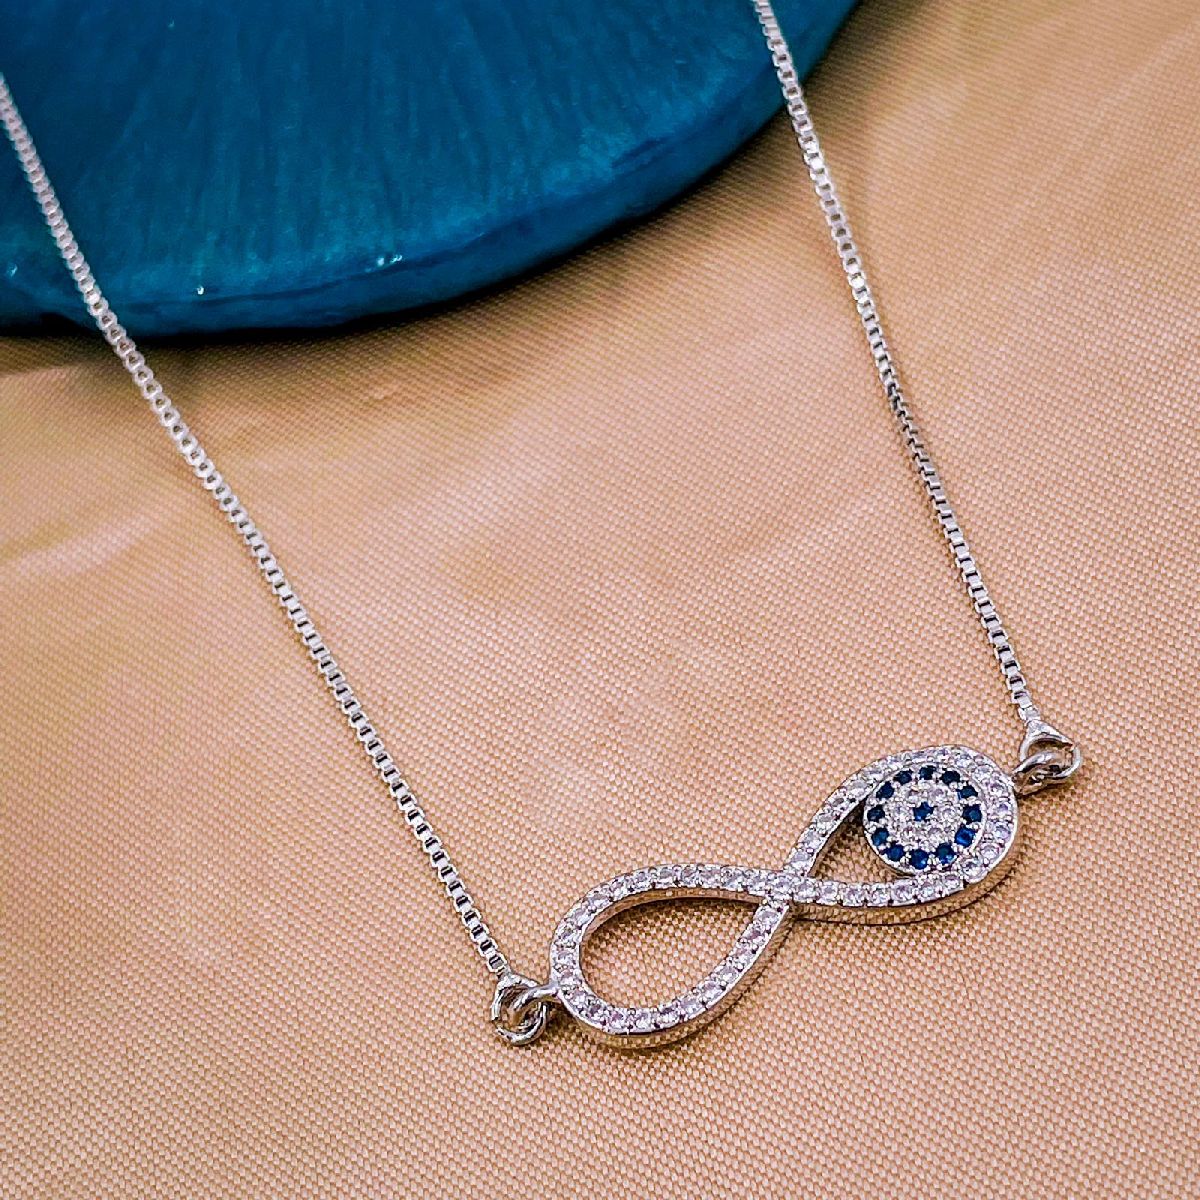 Tennis Necklace - The M Jewelers